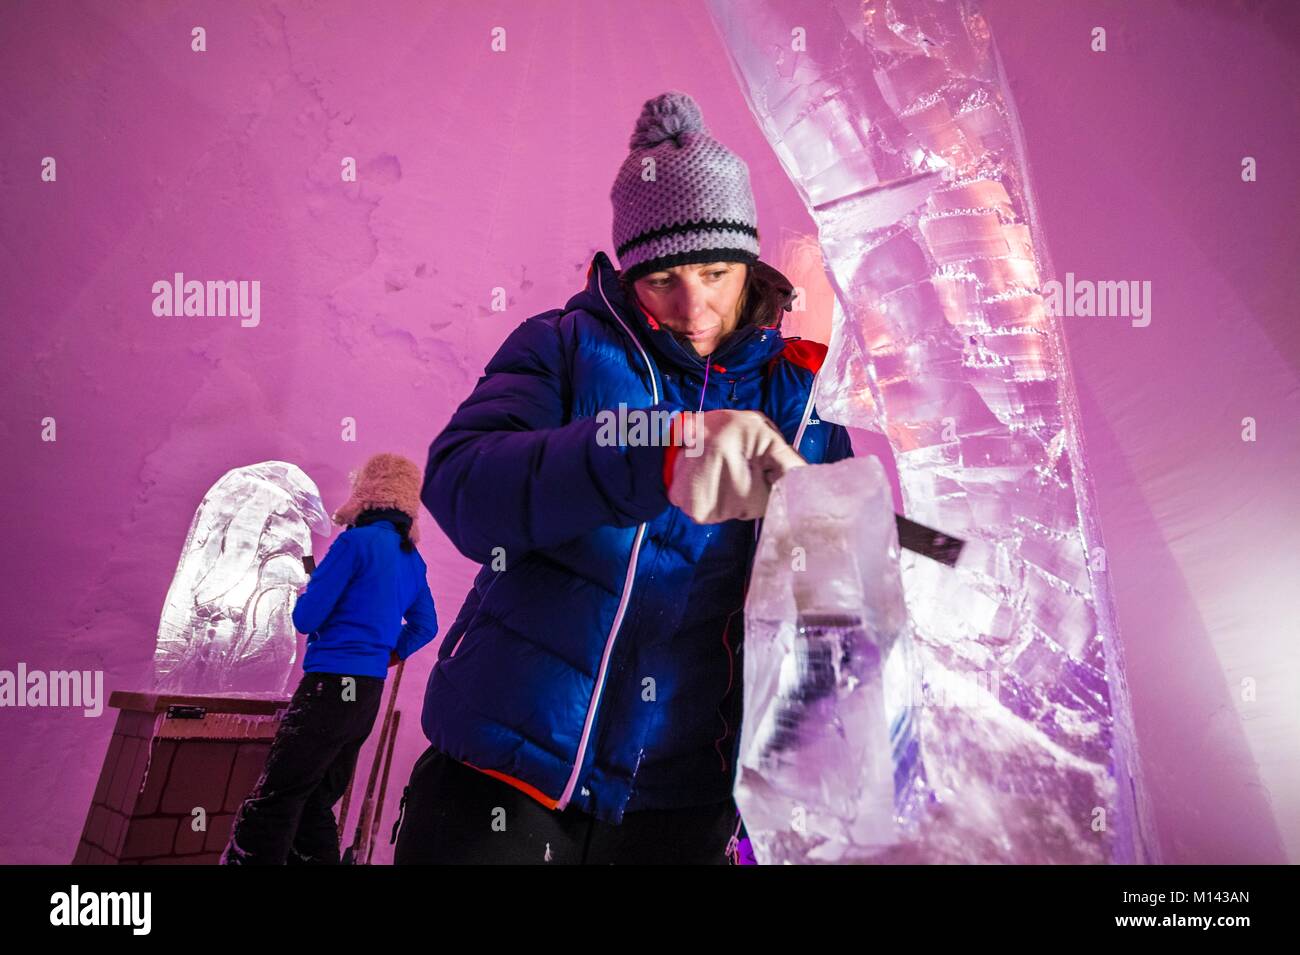 France, Savoie, Tarentaise valley, Vanoise massif, Arcs 2000 ski resort, Manon CHERPE sculpts an ice fish with the chainsaw, for the sculpture gallery of the village-igloo, during the winter season 2017-2018 Stock Photo